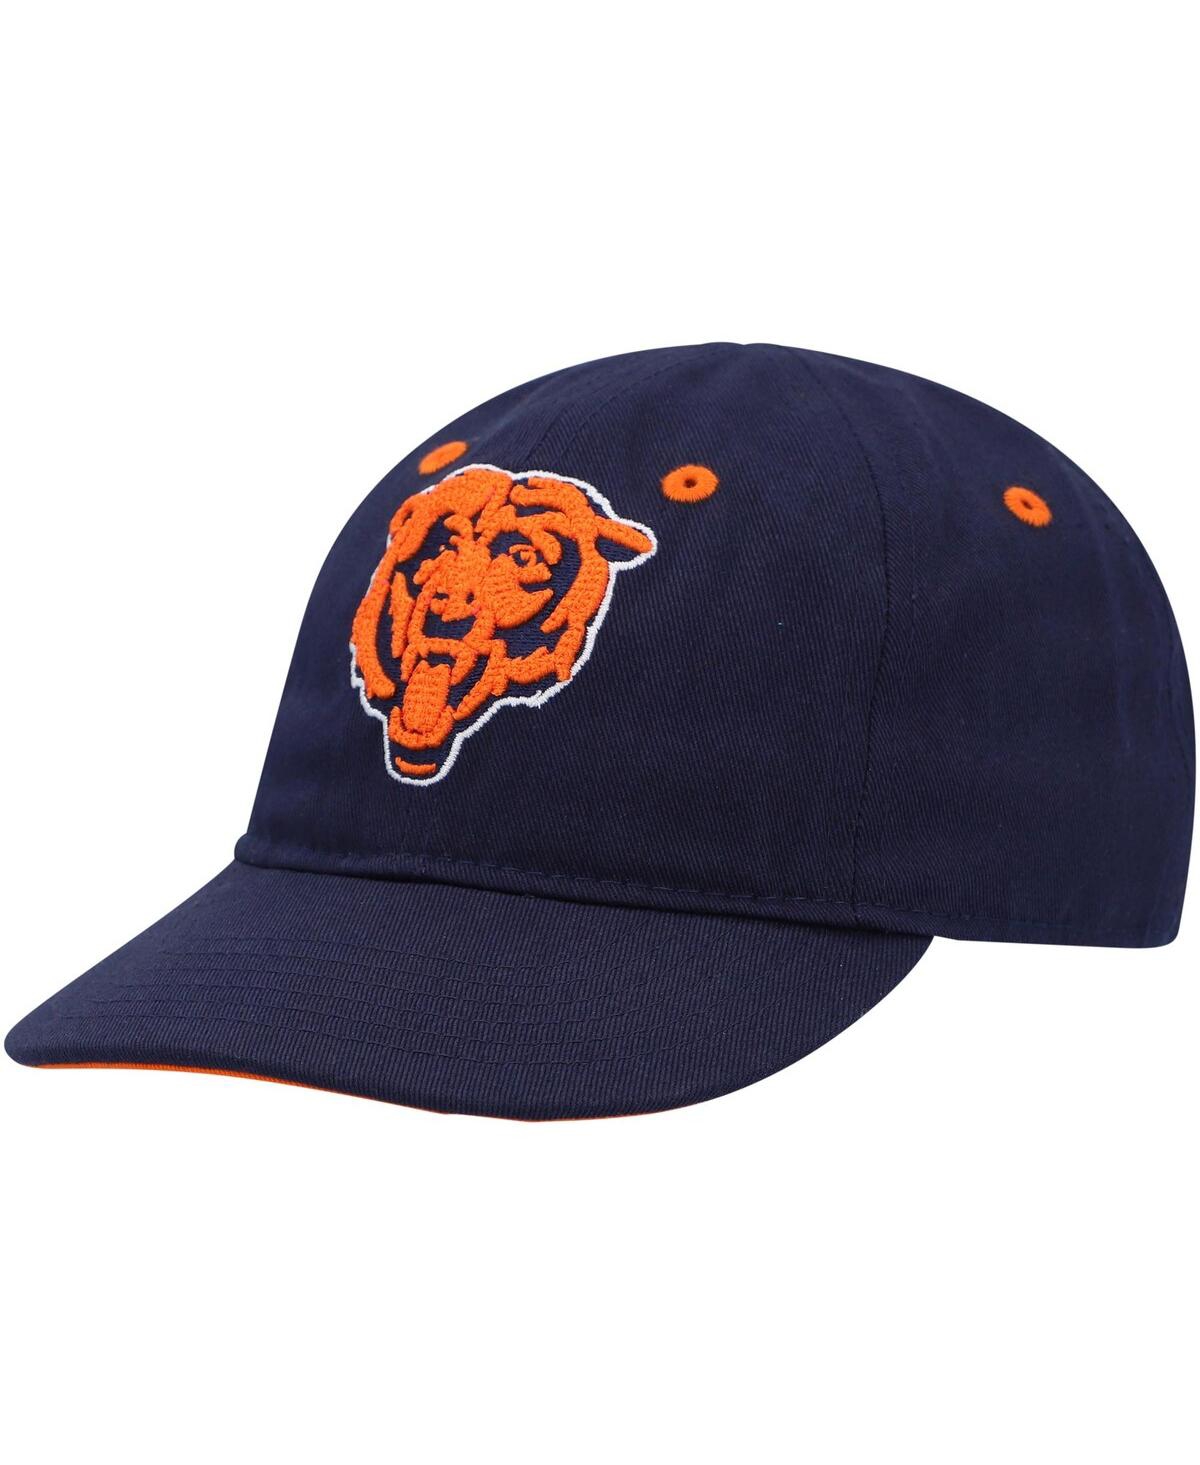 Outerstuff Babies' Newborn And Infant Boys And Girls Navy Chicago Bears Slouch Flex Hat